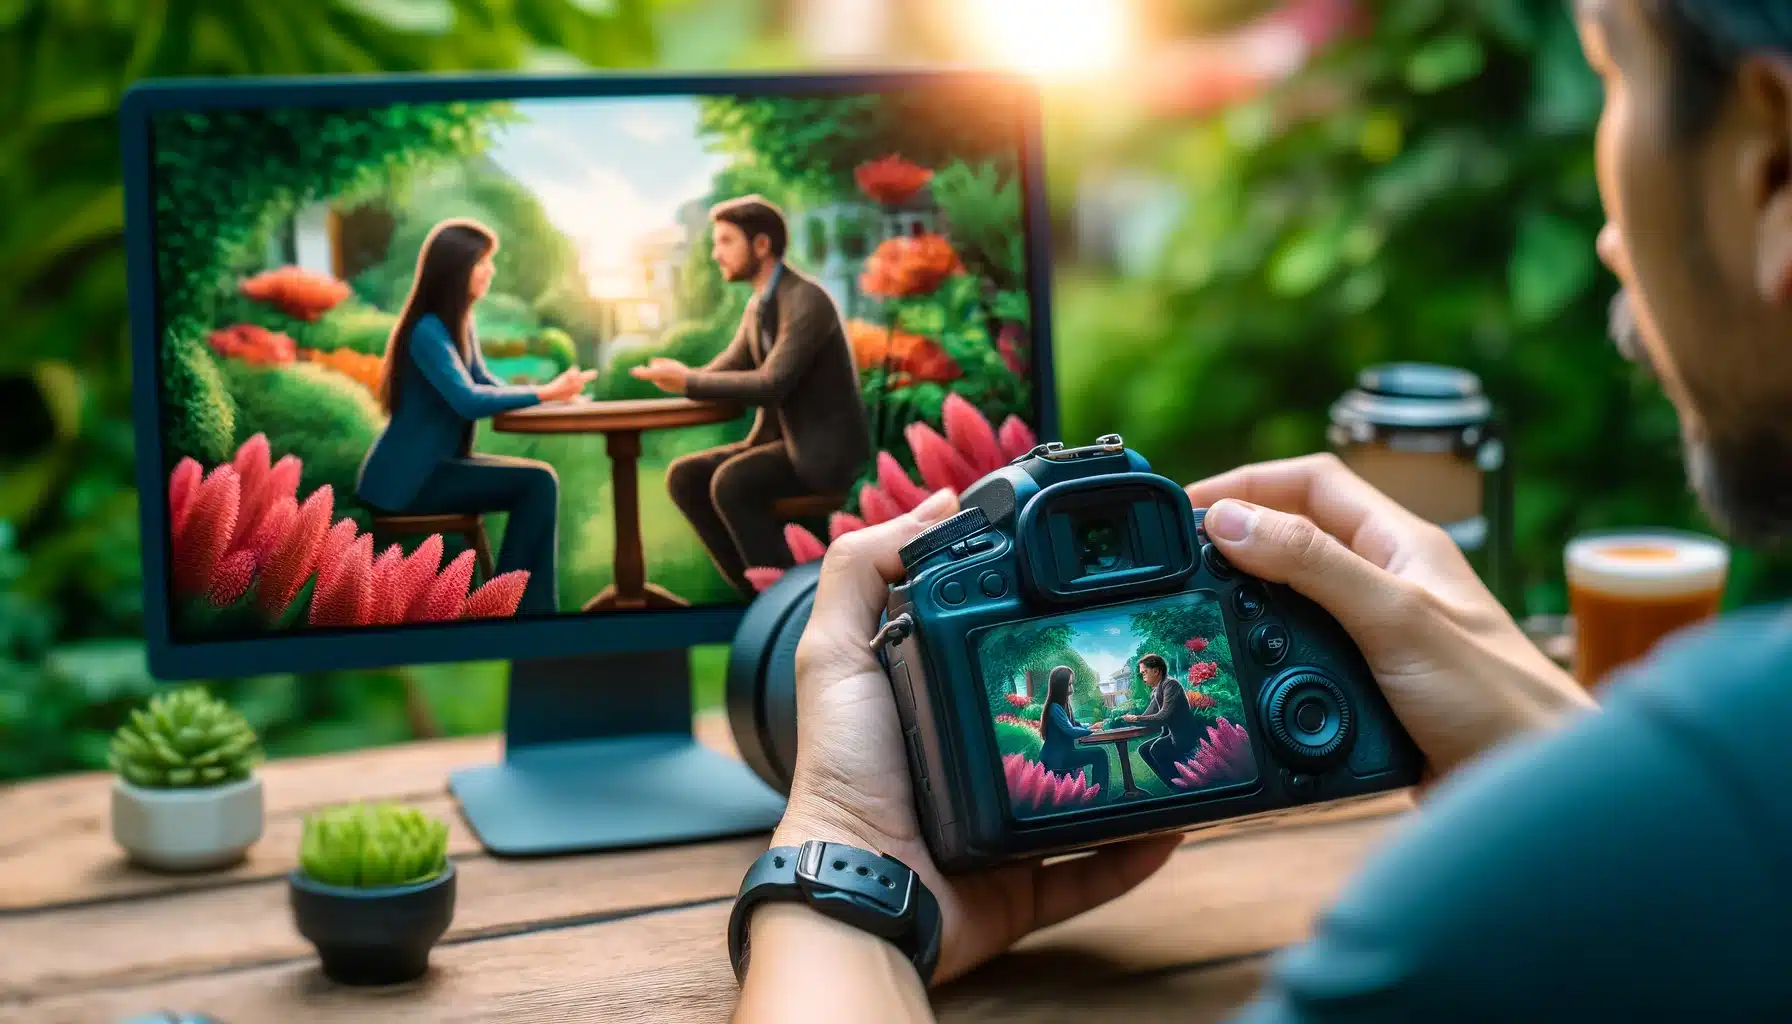 Photographer in a garden capturing two people in conversation at a desk using Orifice Precedence Way, with a beautifully blurred background.